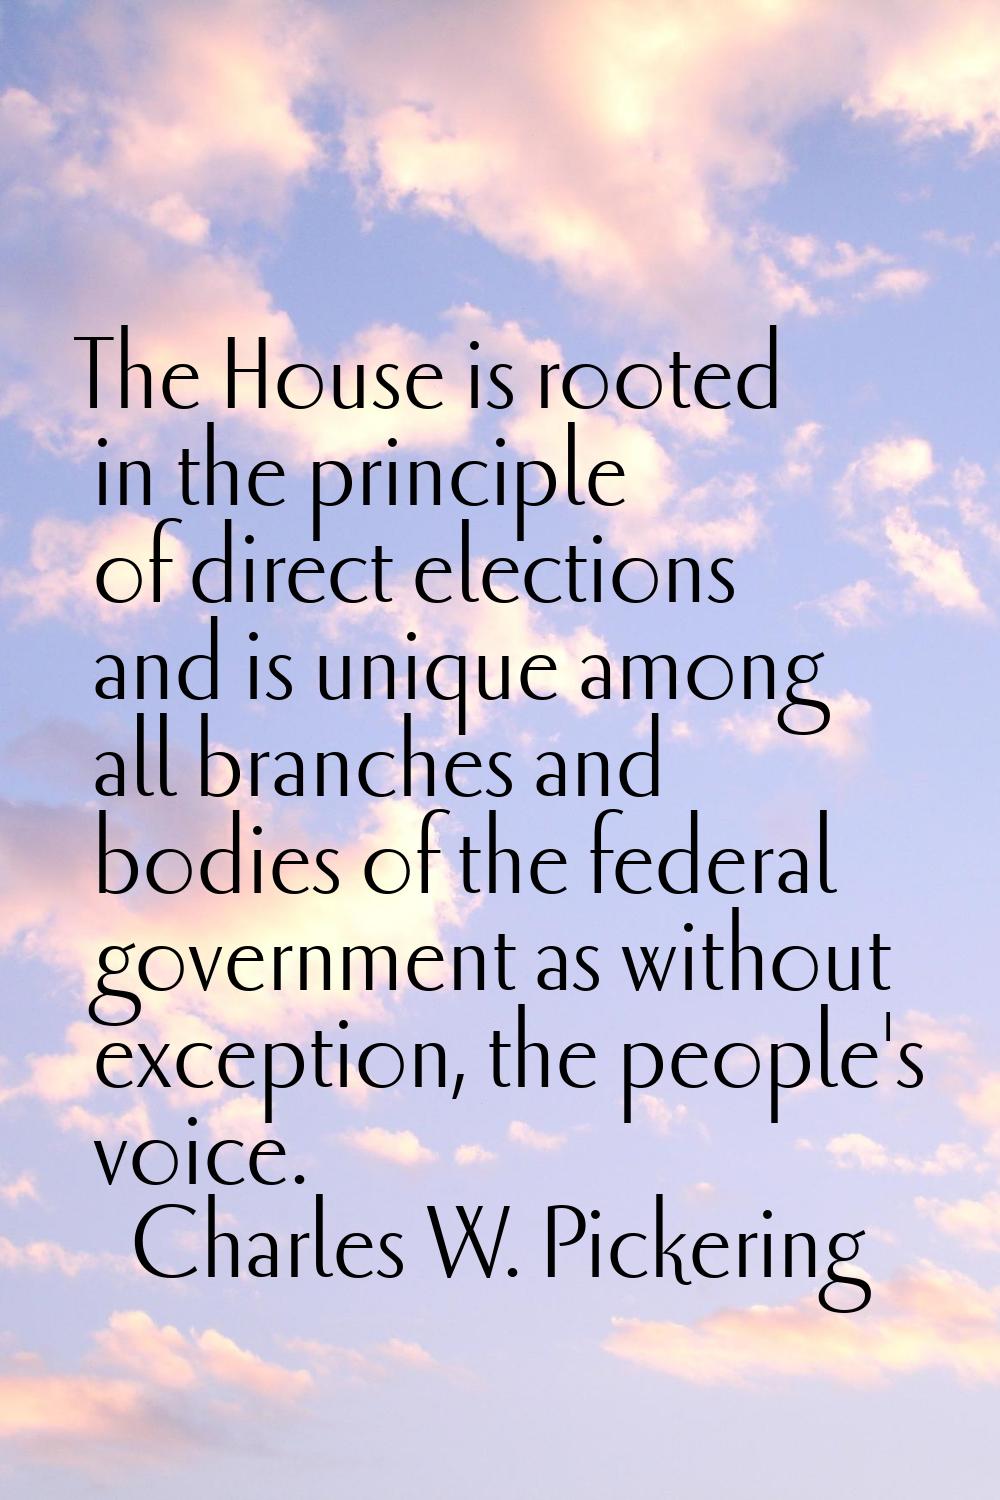 The House is rooted in the principle of direct elections and is unique among all branches and bodie